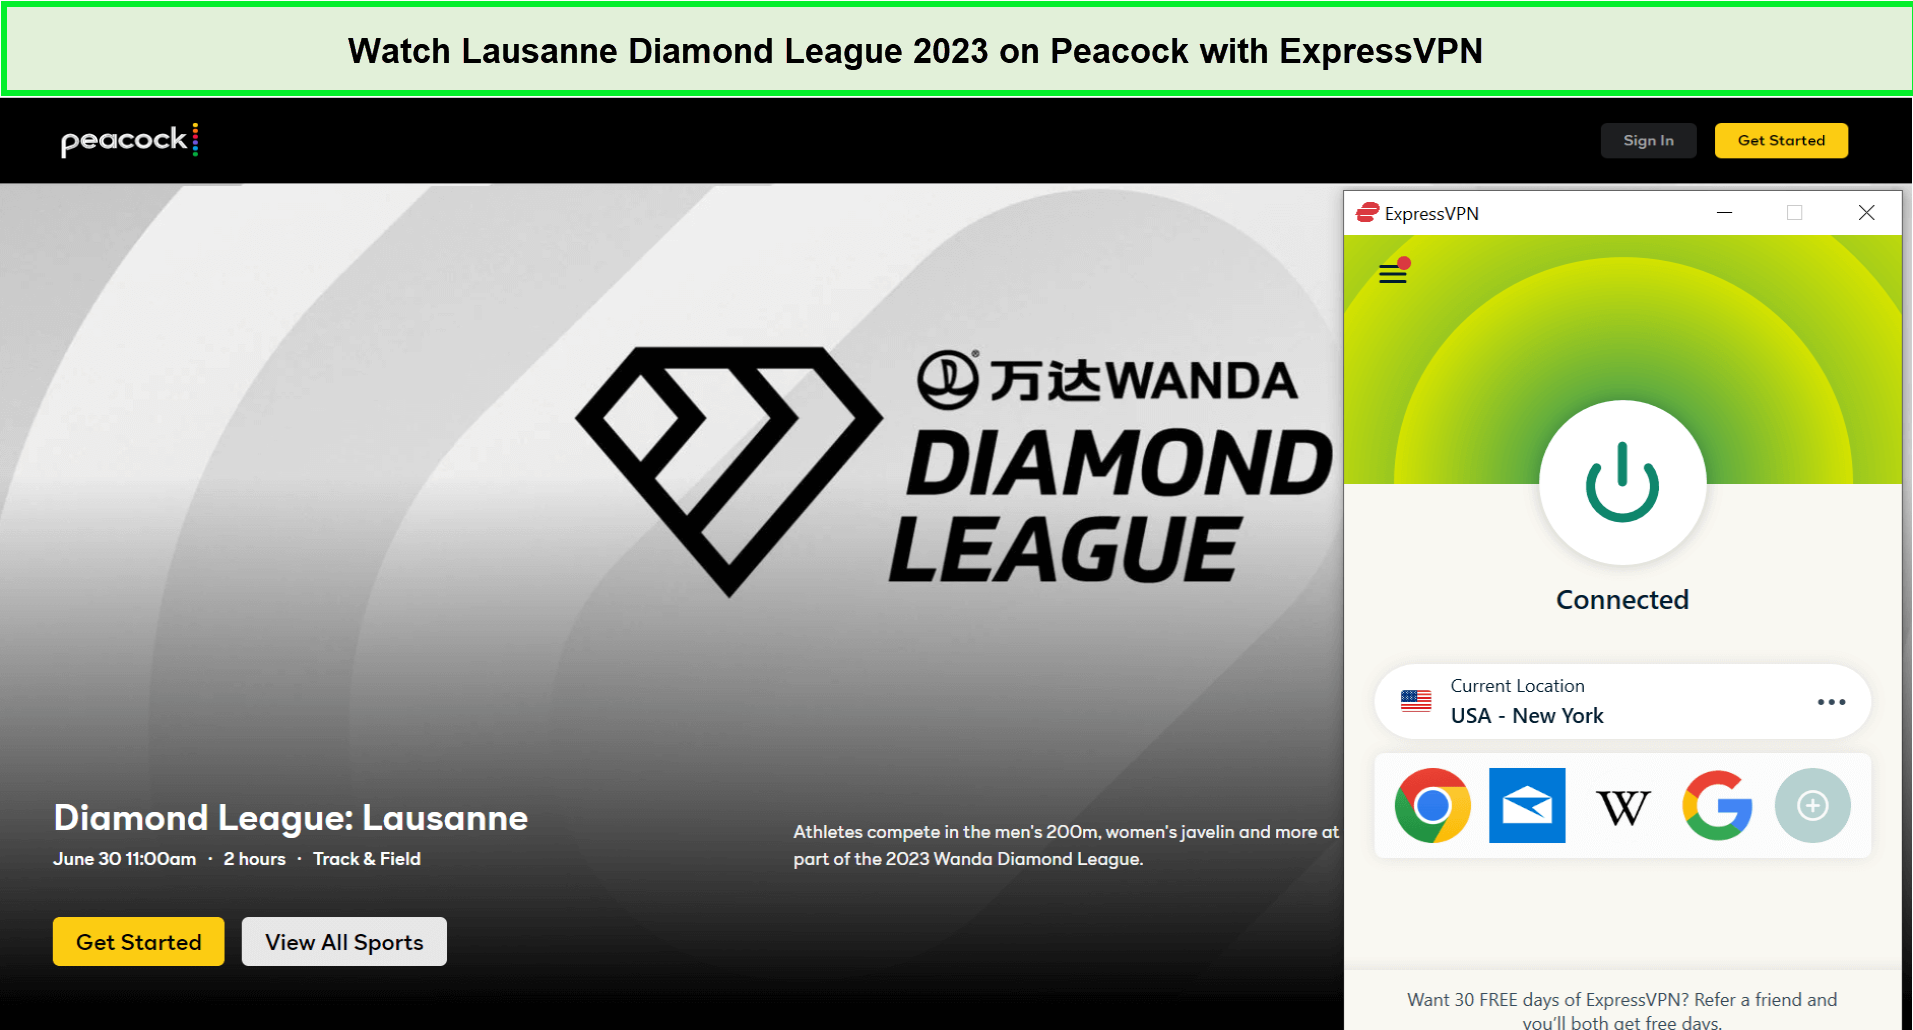 Watch-Lausanne-Diamond-League-2023-in-South Korea-on-Peacock-with-ExpressVPN